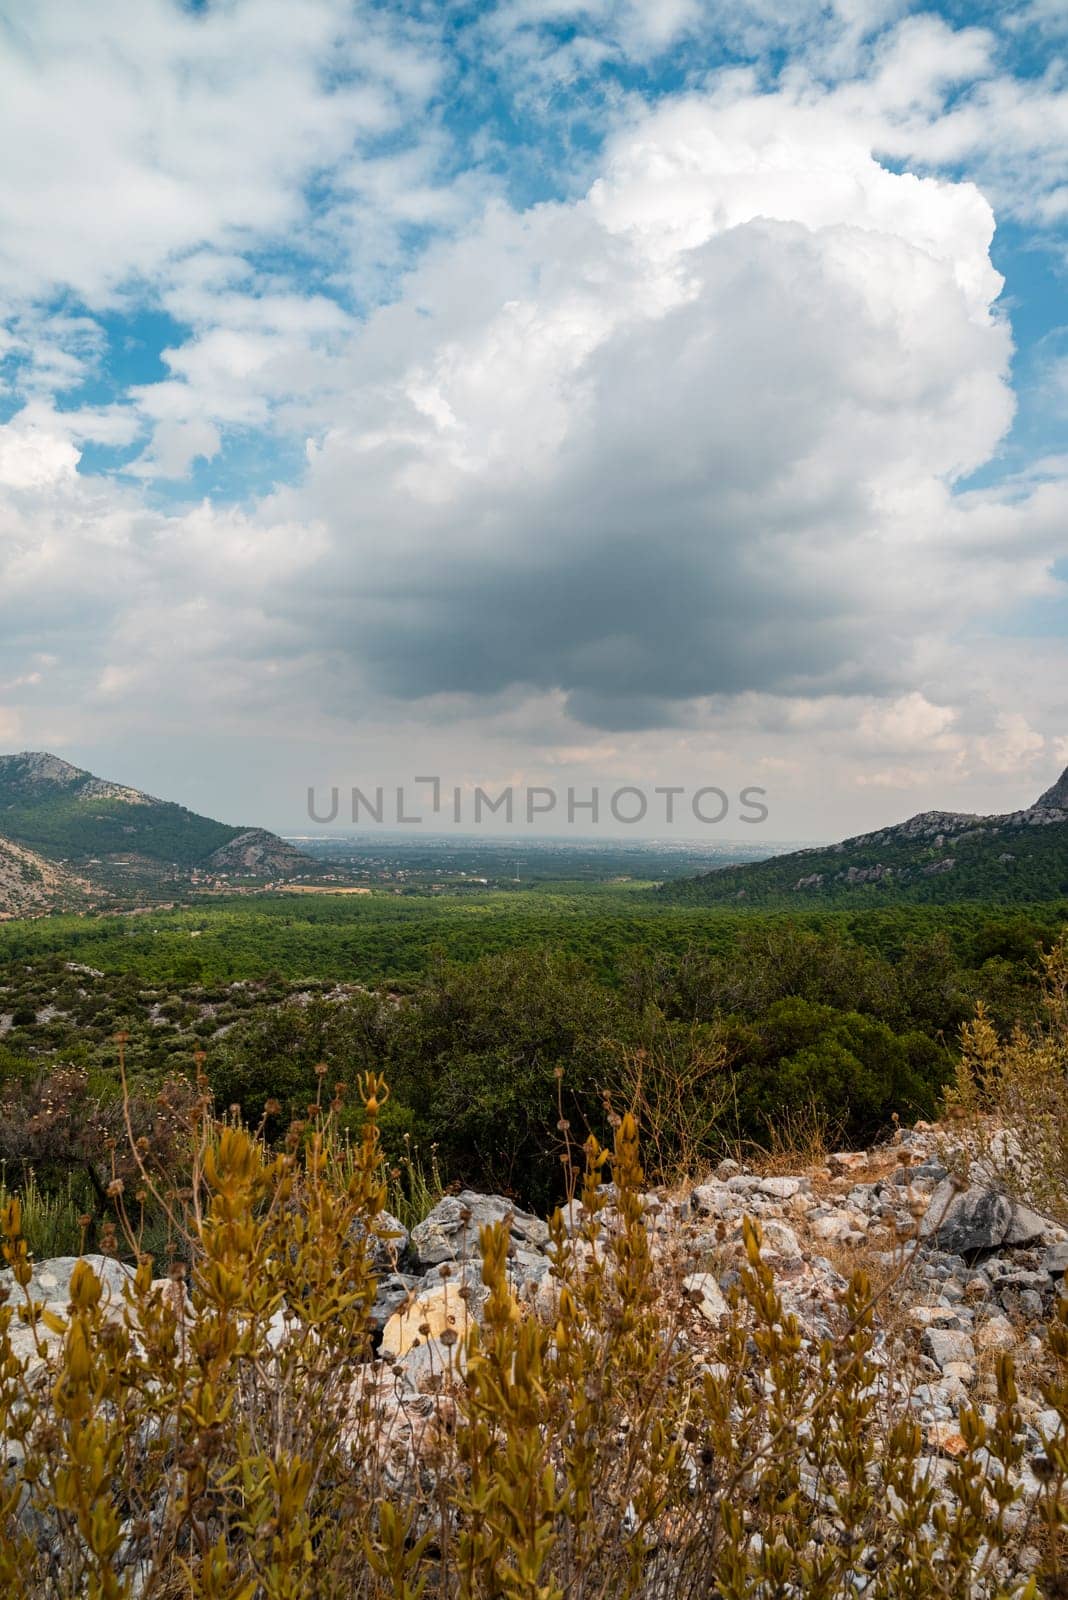 Antalya view from the road to the ancient city of Termessos by Sonat